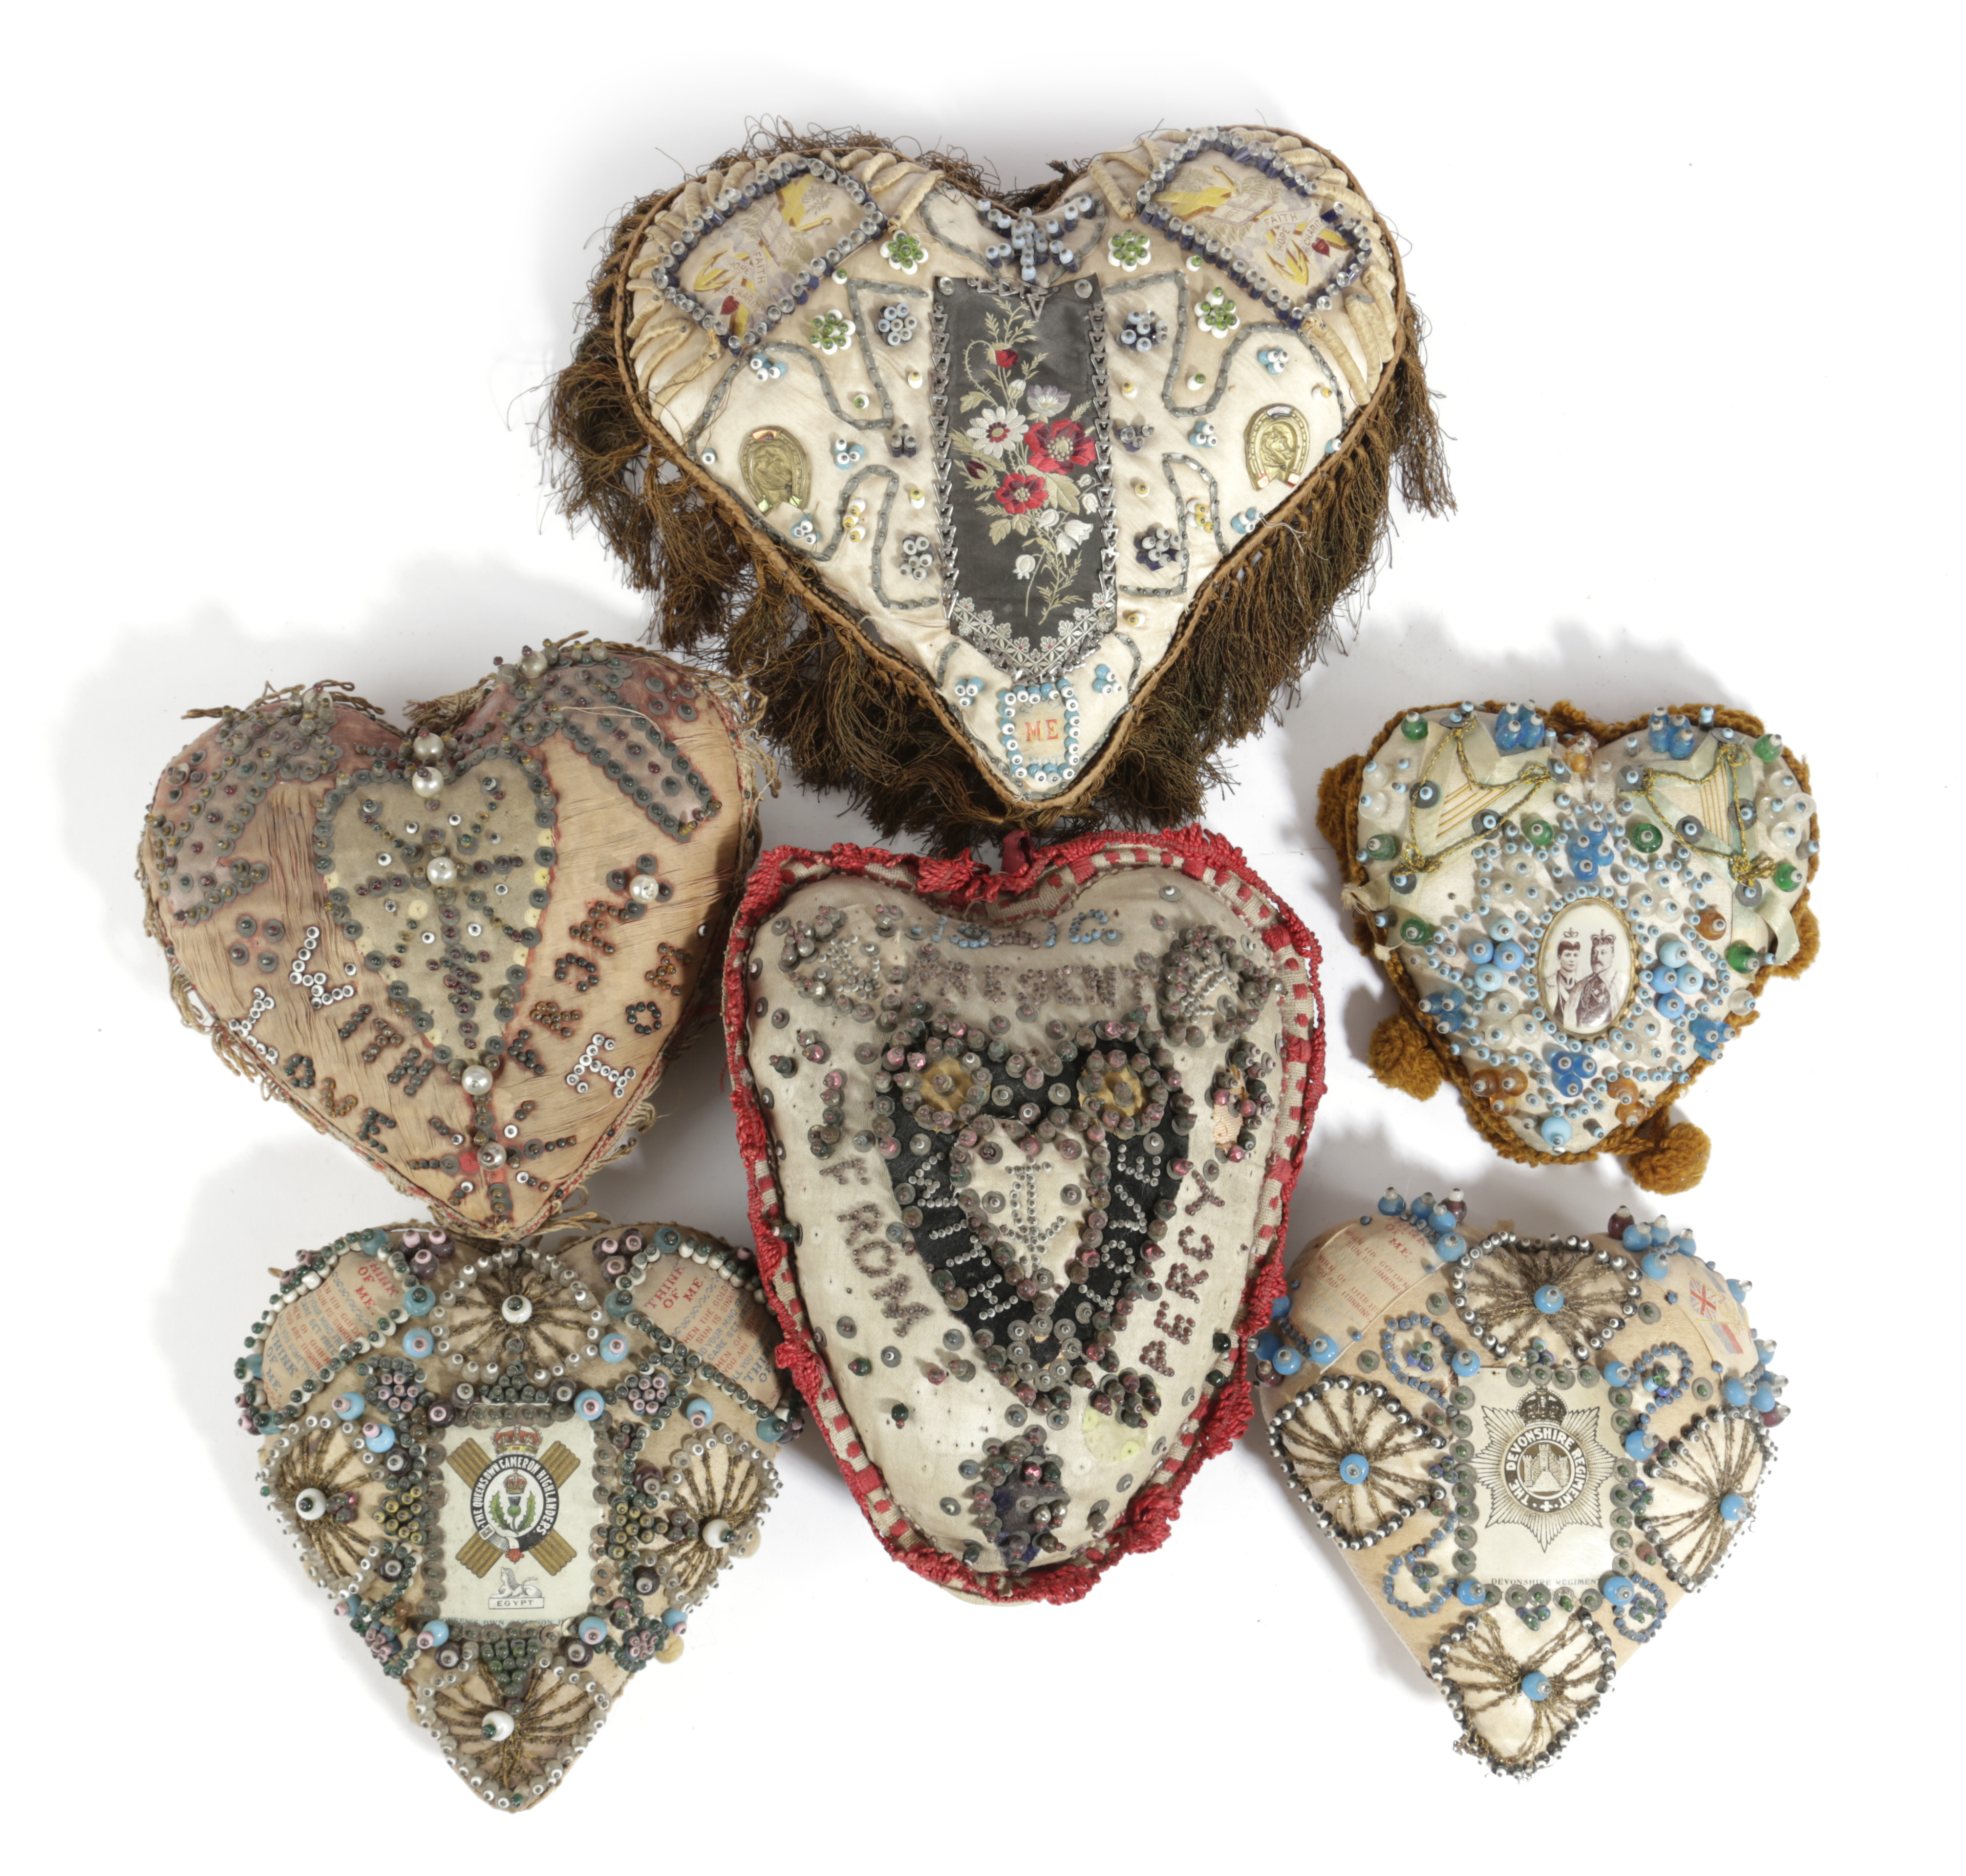 A COLLECTION OF SIX HEART-SHAPED SWEETHEART OR VALENTINE'S CUSHIONS LATE 19TH / EARLY 20TH CENTURY